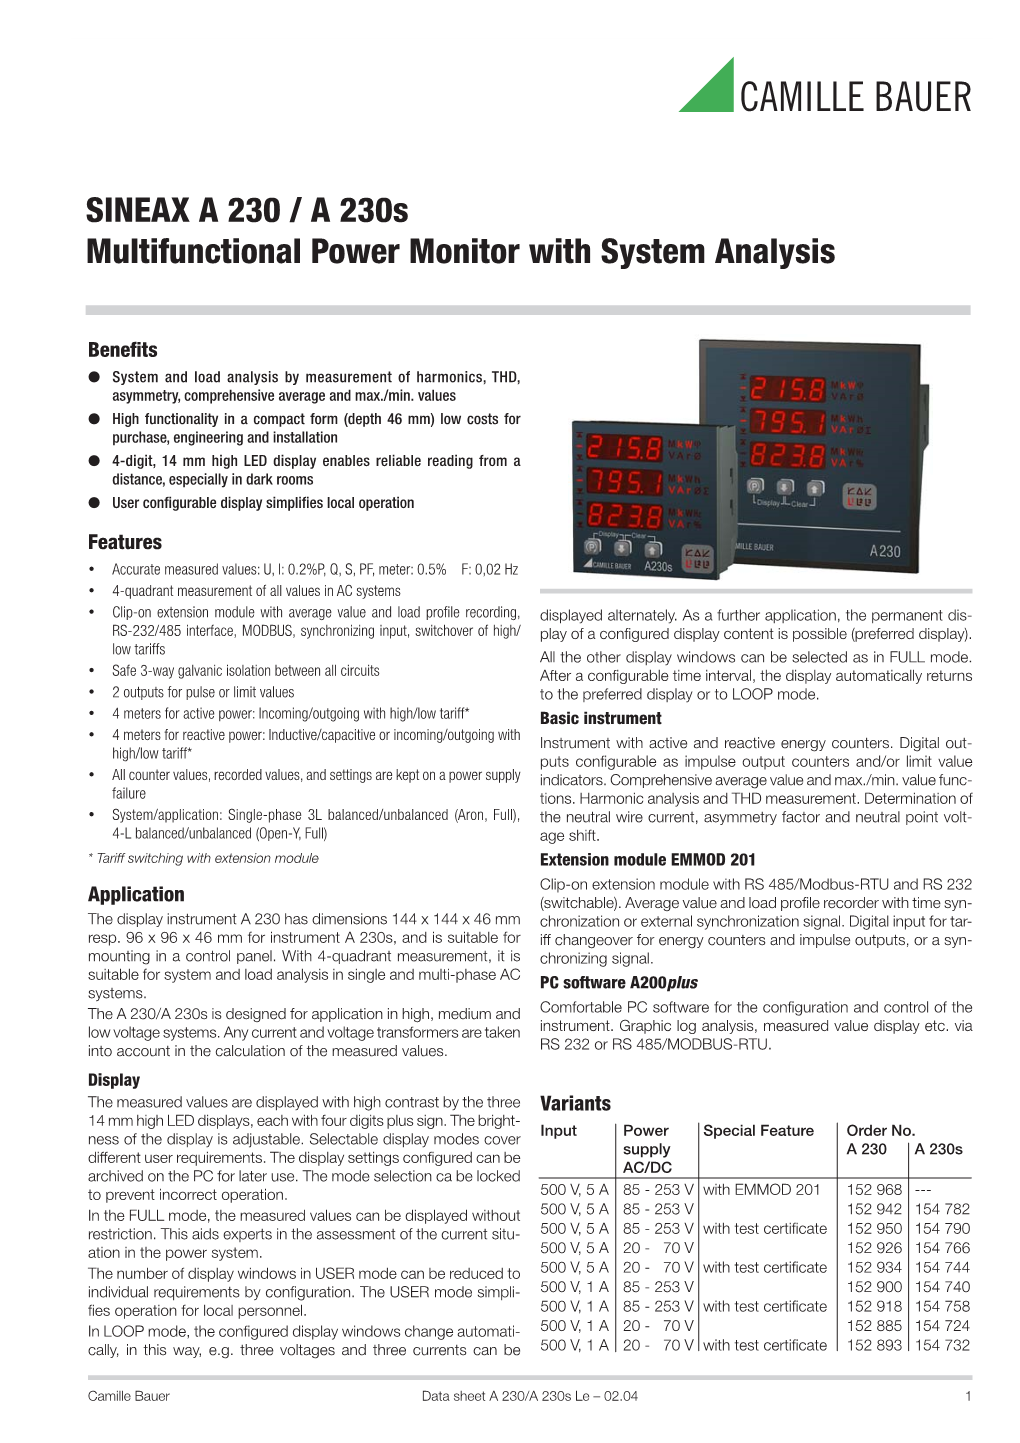 SINEAX a 230 / a 230S Multifunctional Power Monitor with System Analysis